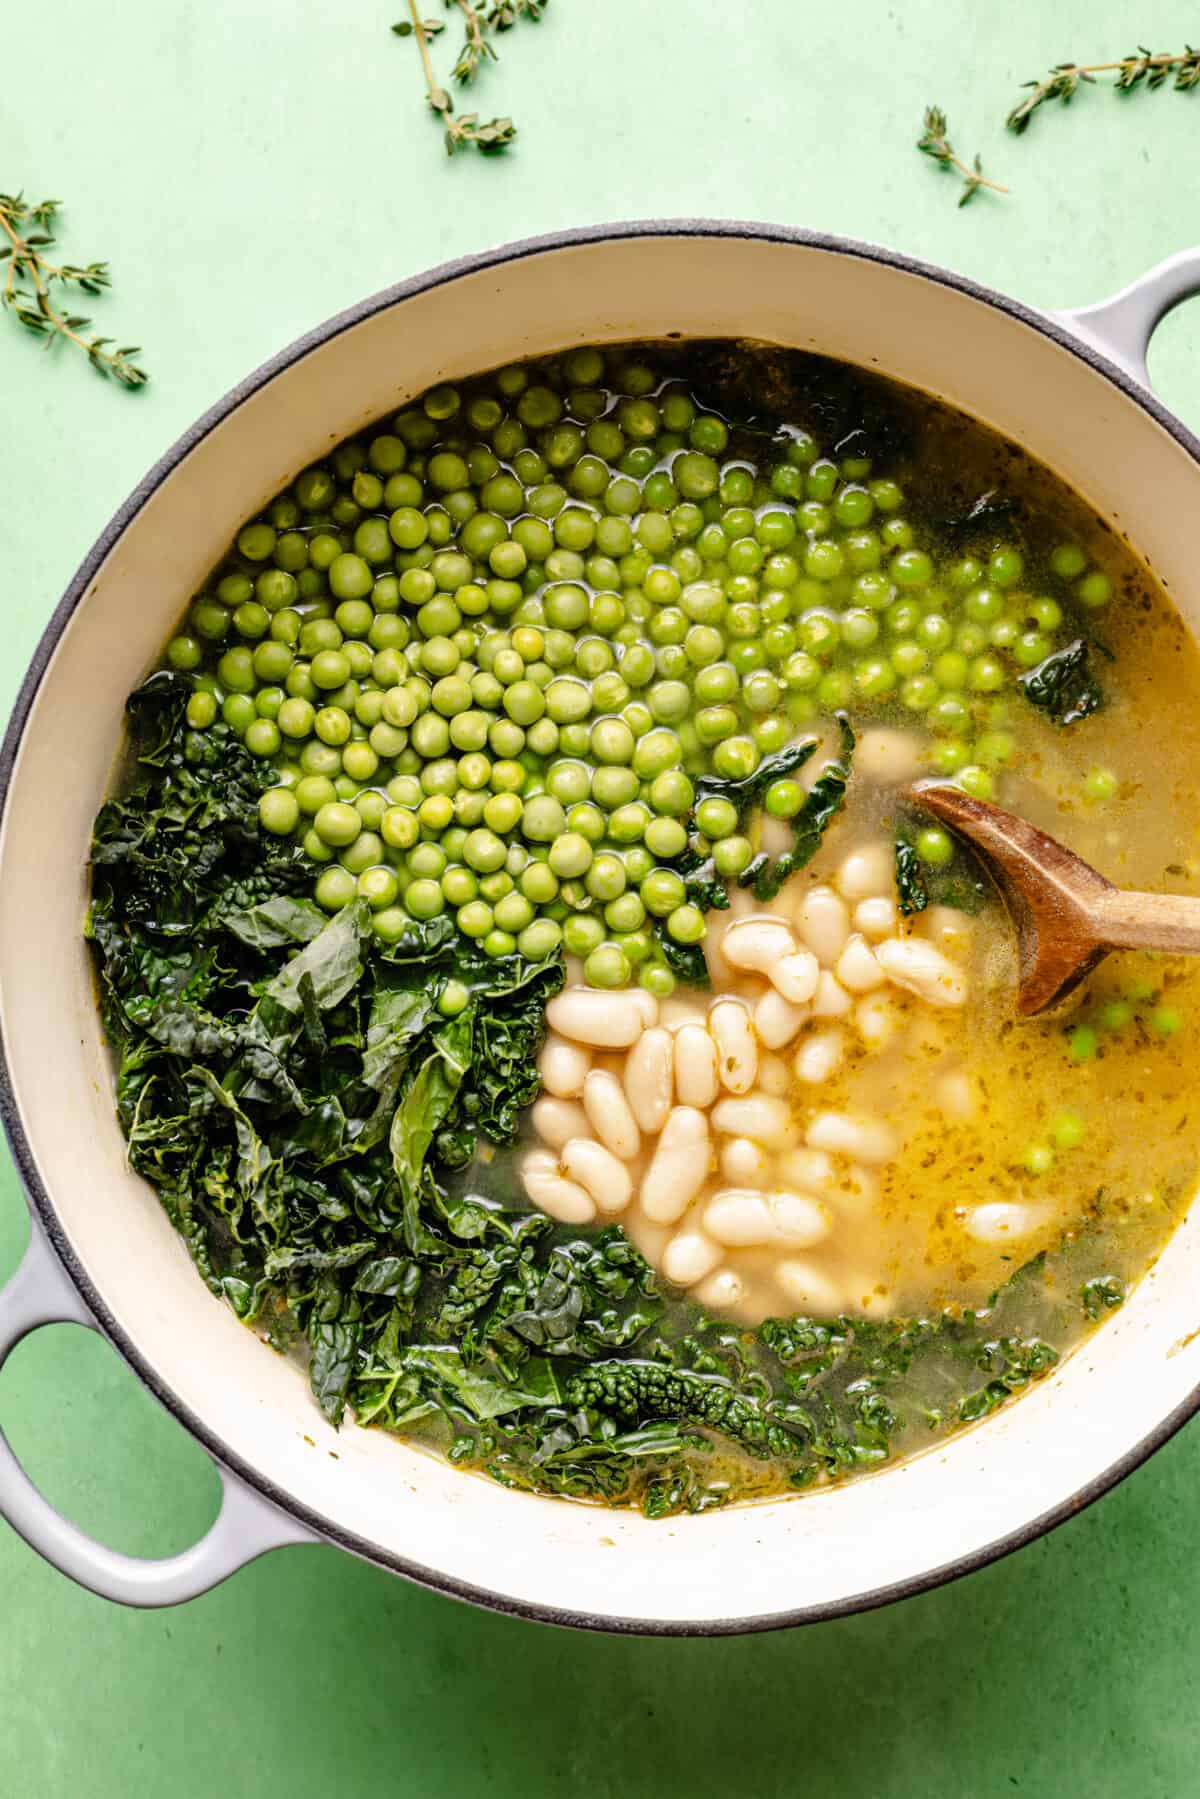 Spring Green Minestrone with greens, peas and beans not stirred together yet.